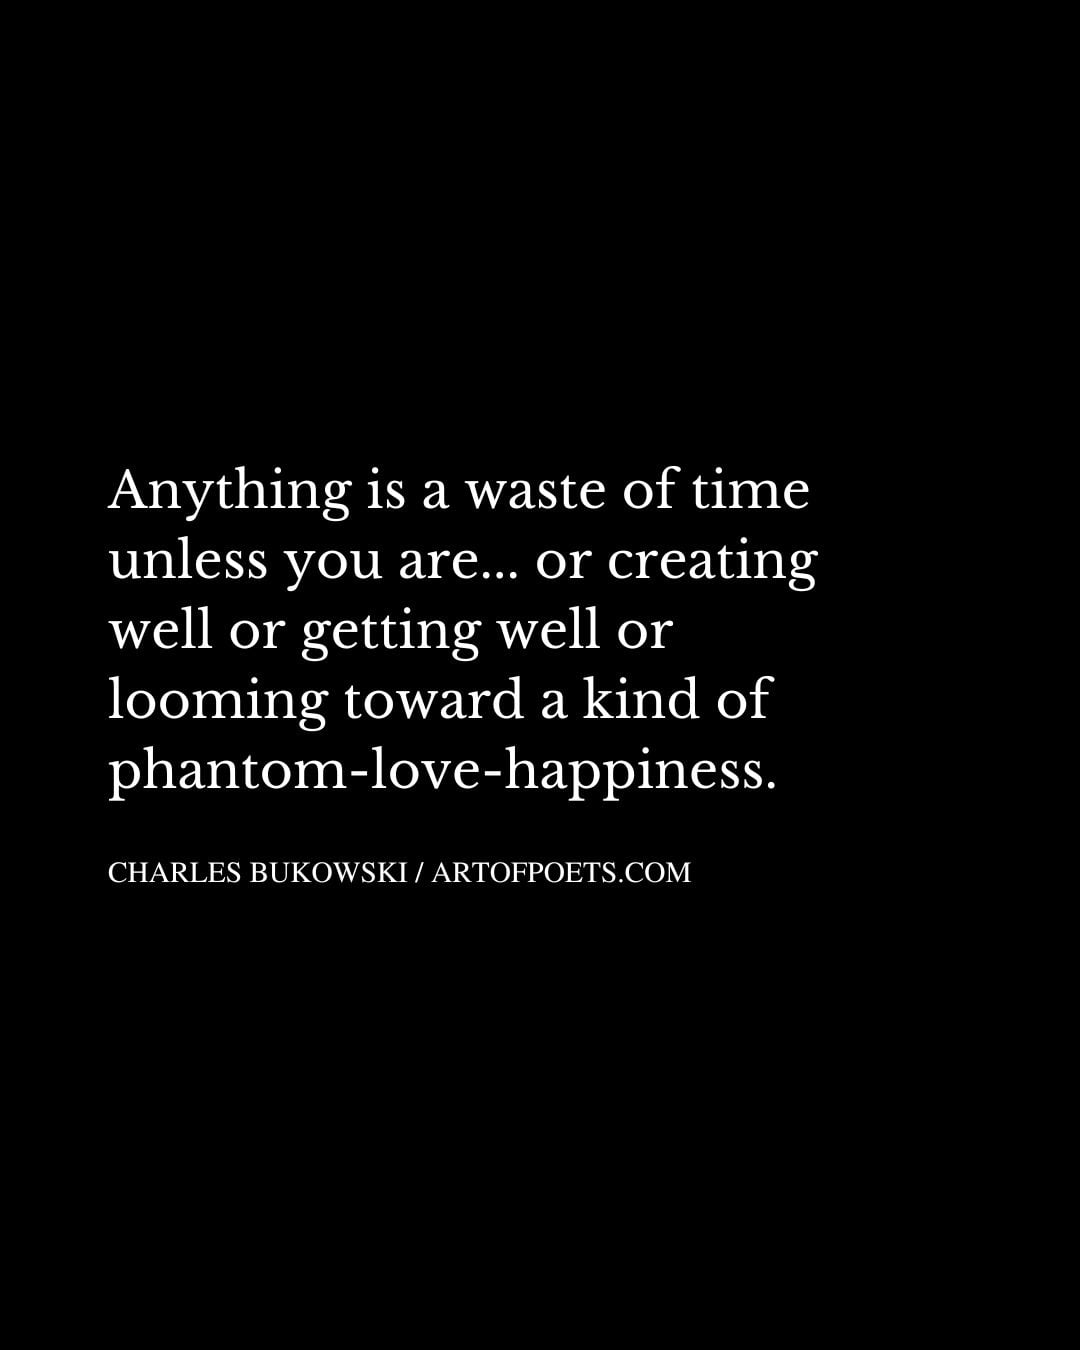 Anything is a waste of time unless you are. or creating well or getting well or looming toward a kind of phantom love happiness